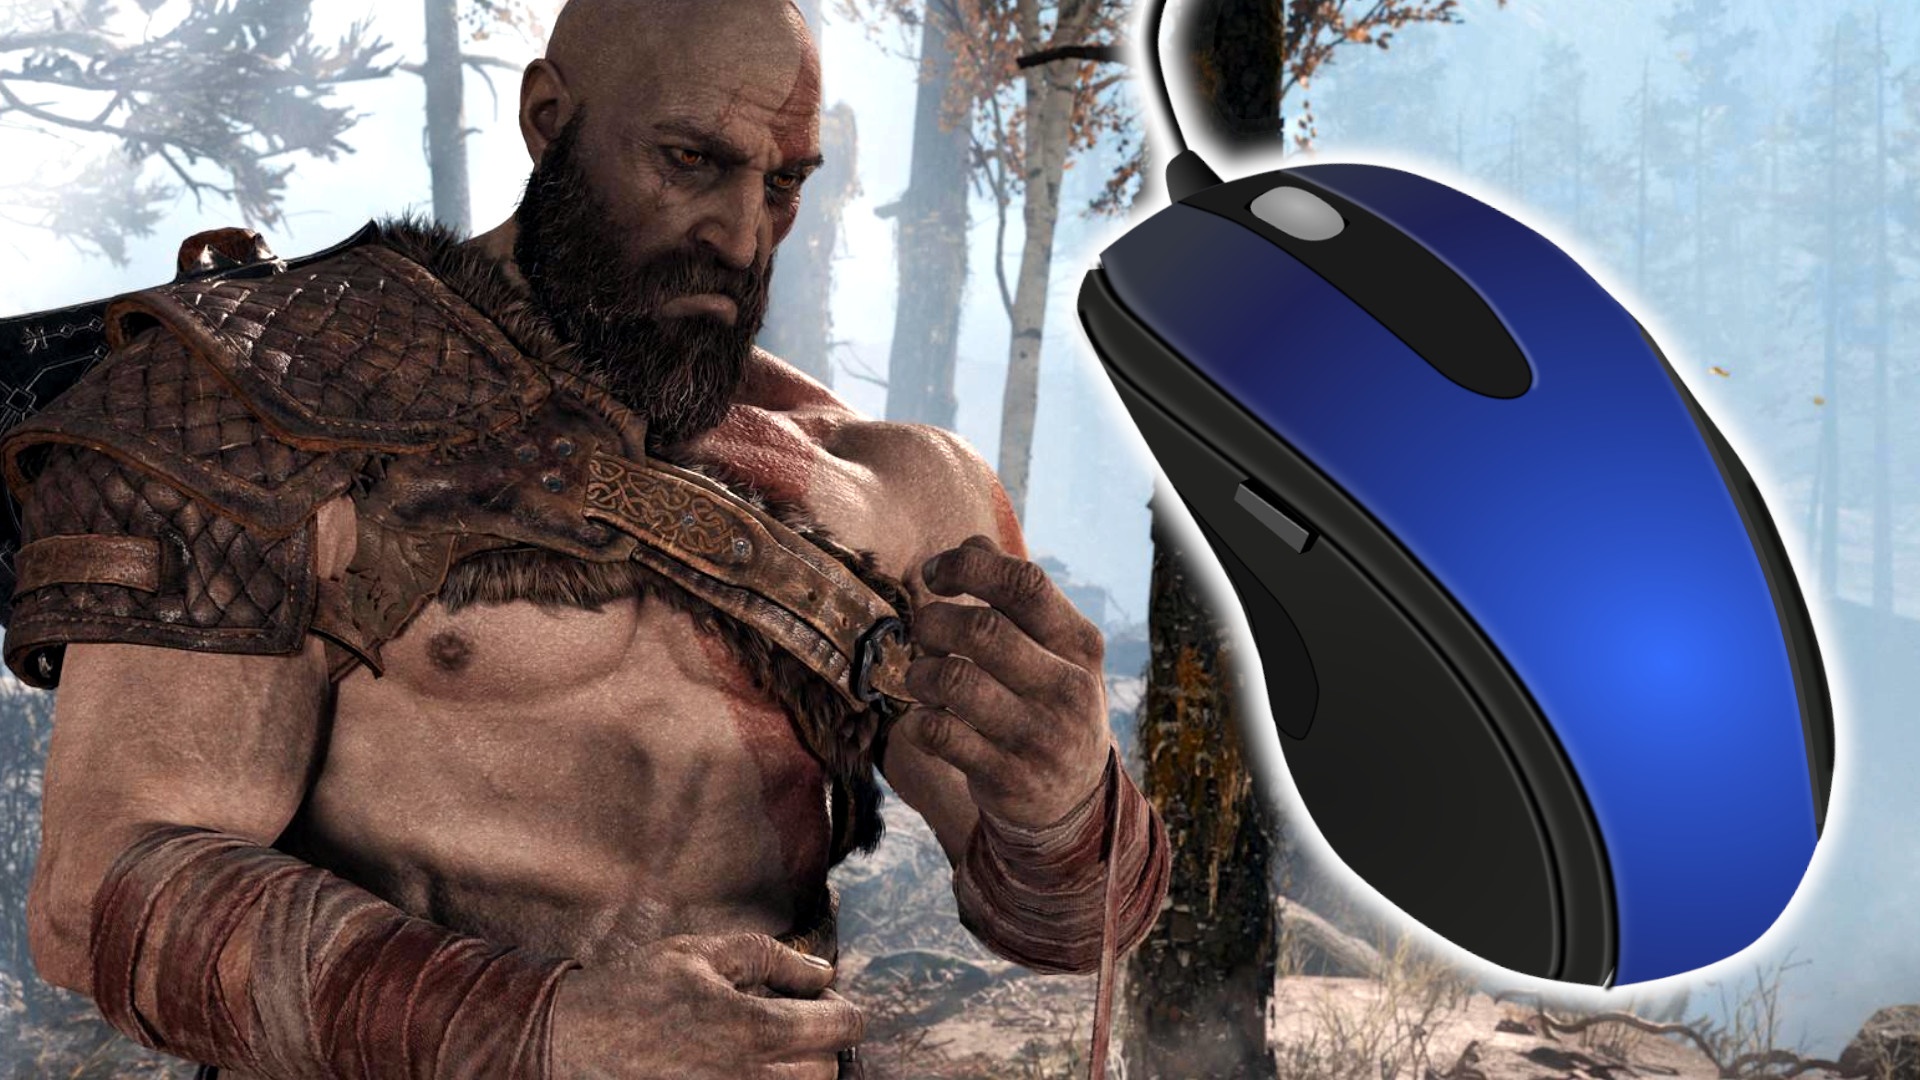 Thanks to a small fix, God of War can finally be controlled more precisely on the PC